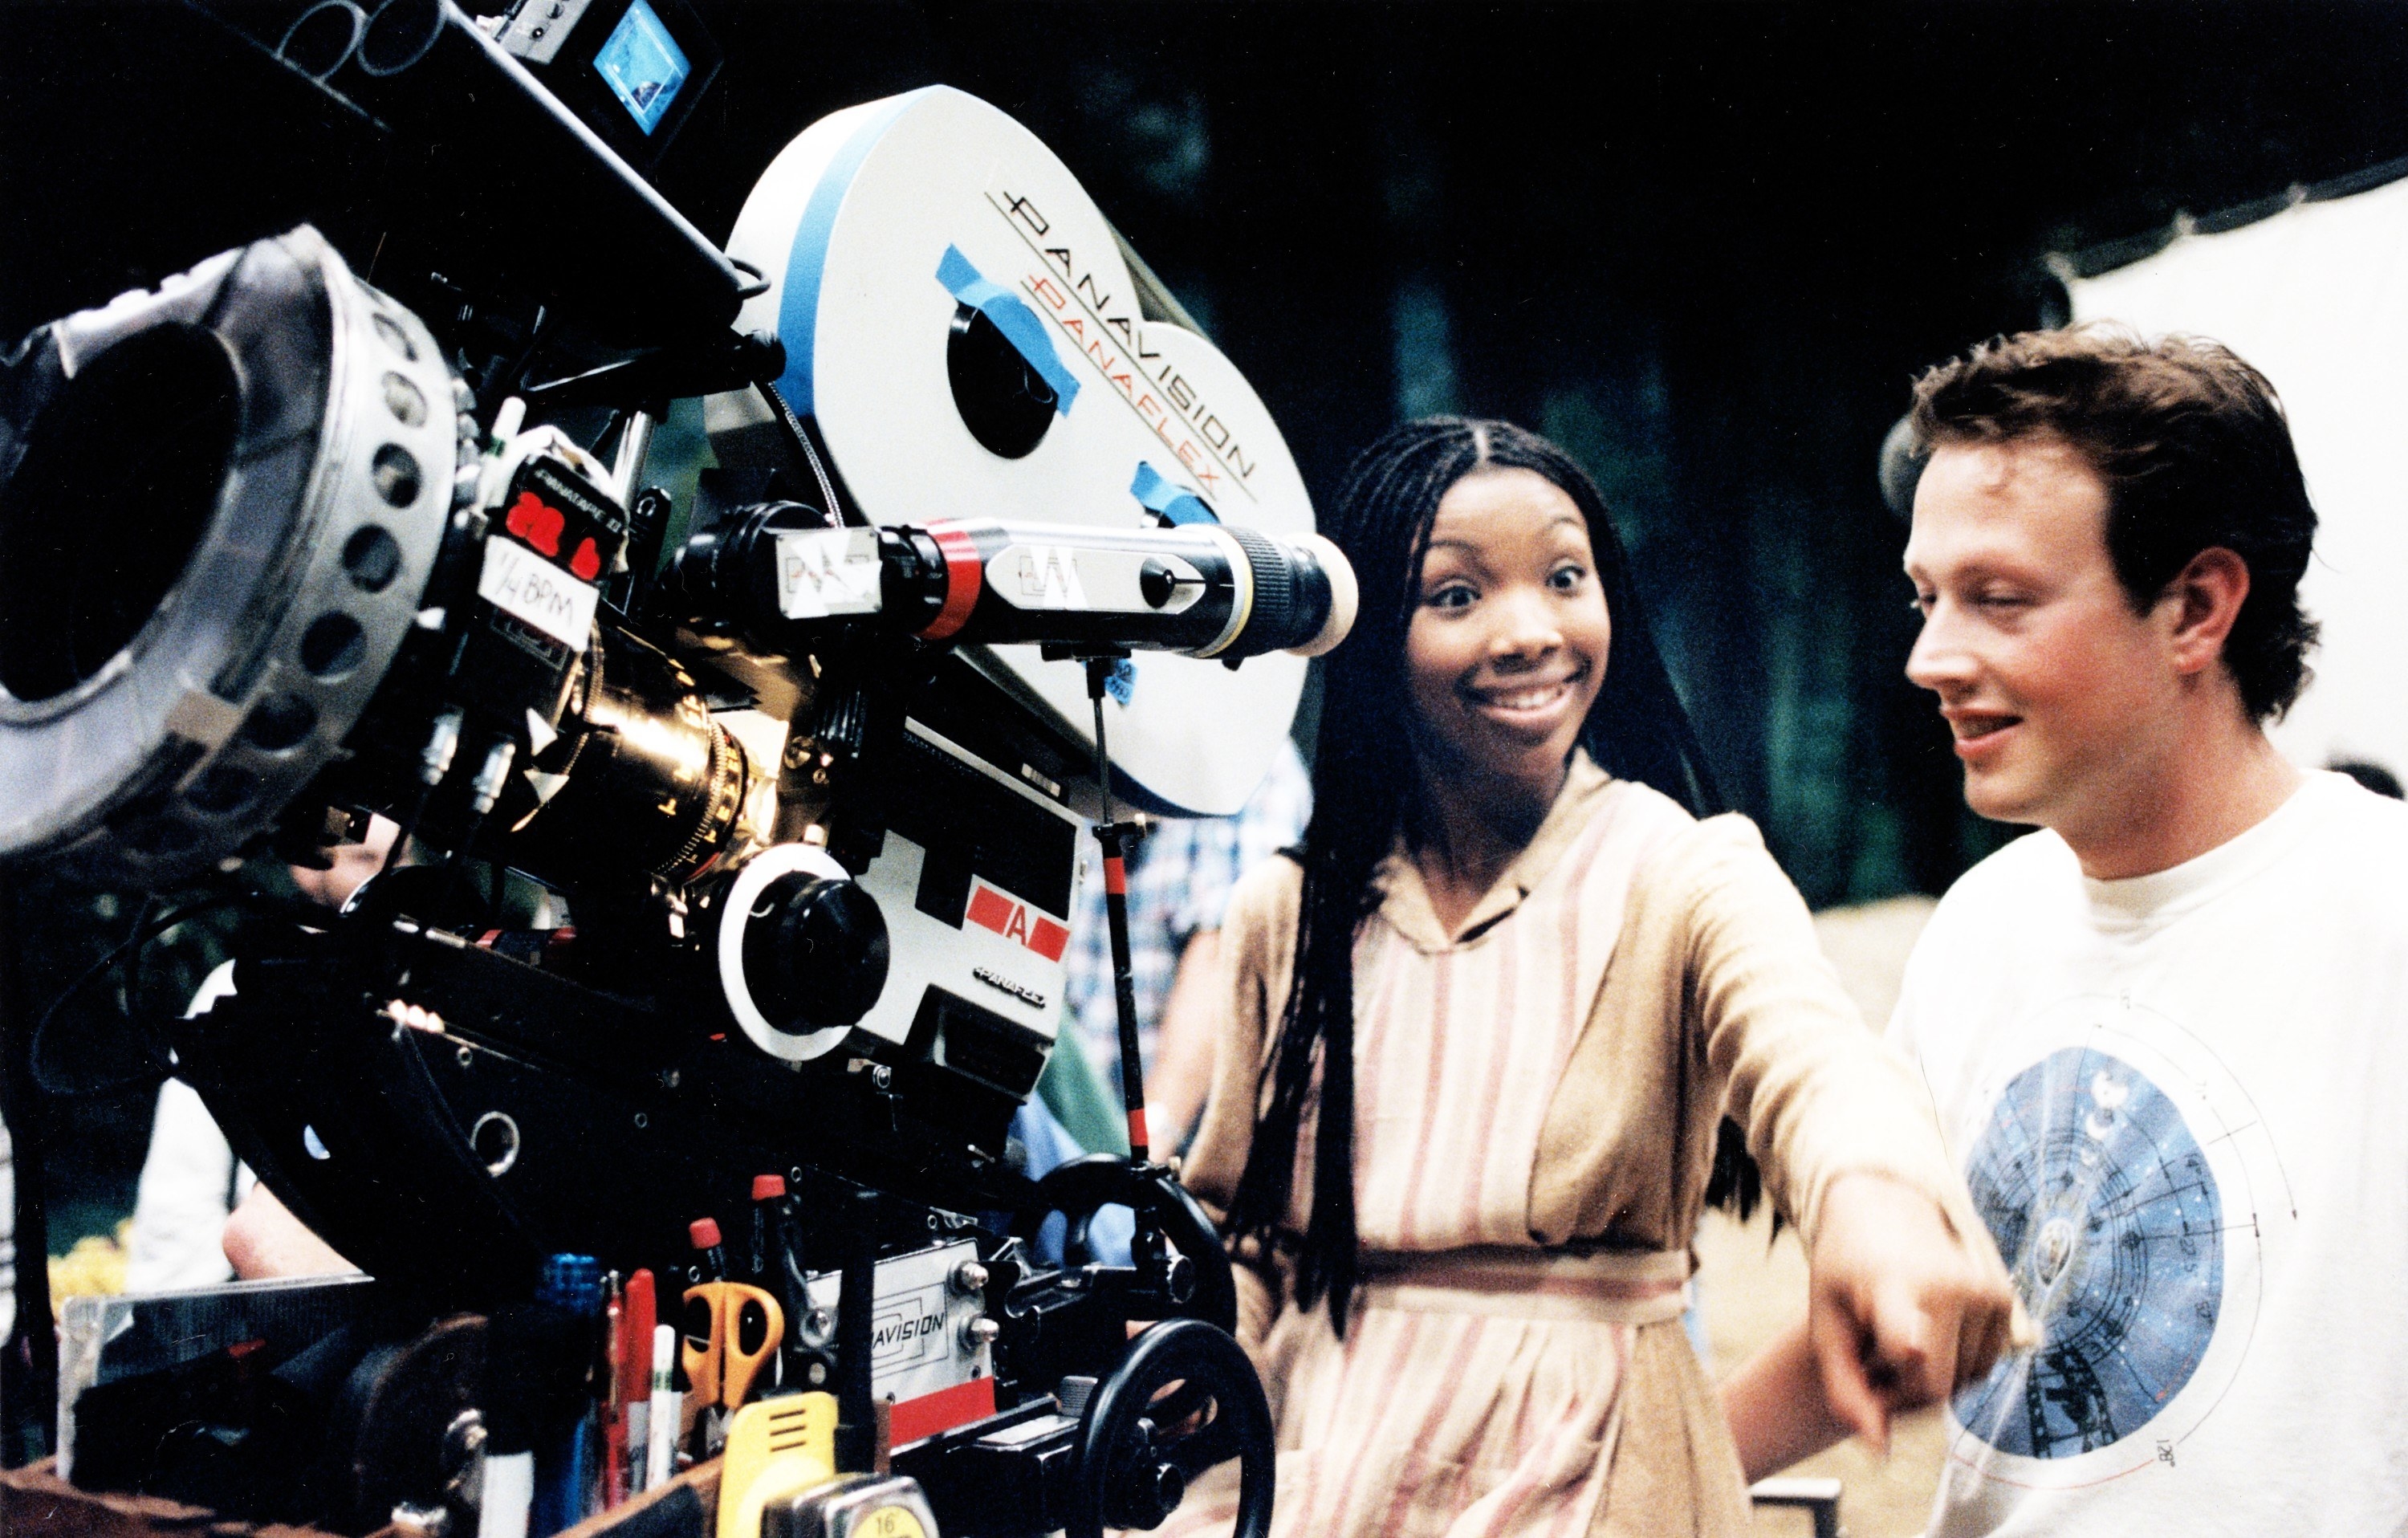 Behind The Scenes Photos From Classic Movie Sets